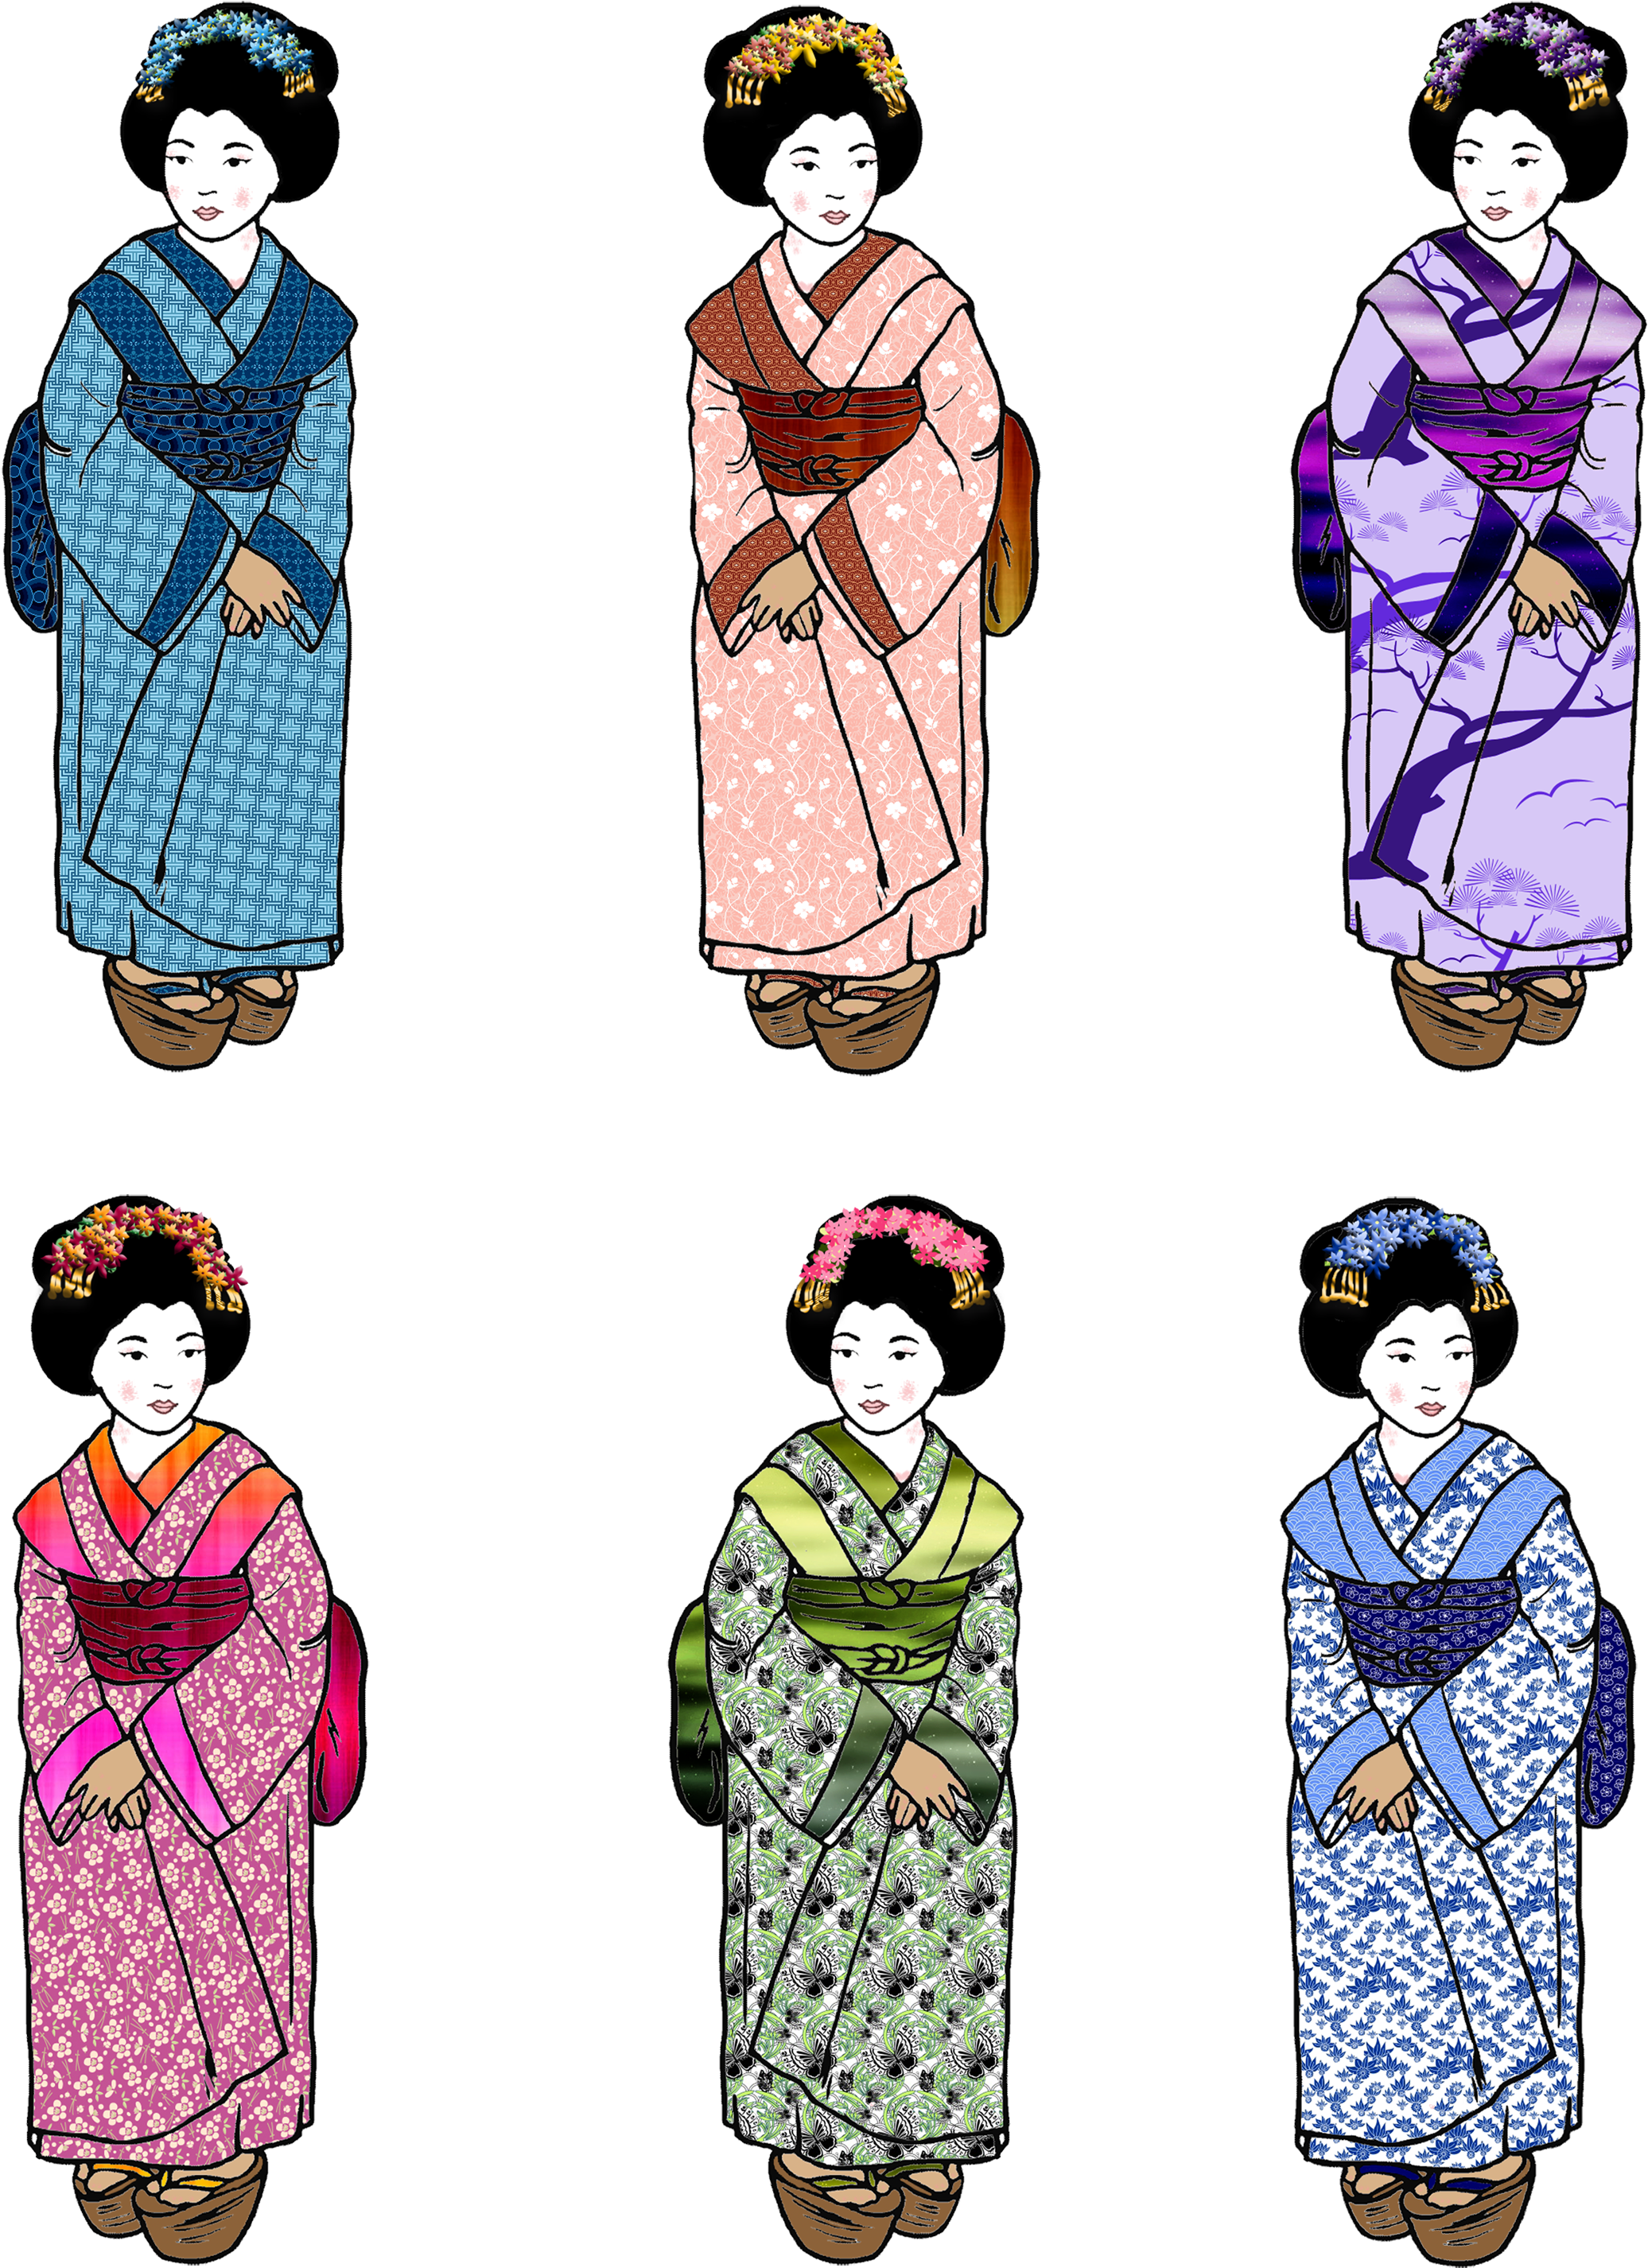 A Group Of Women In Different Colored Dresses